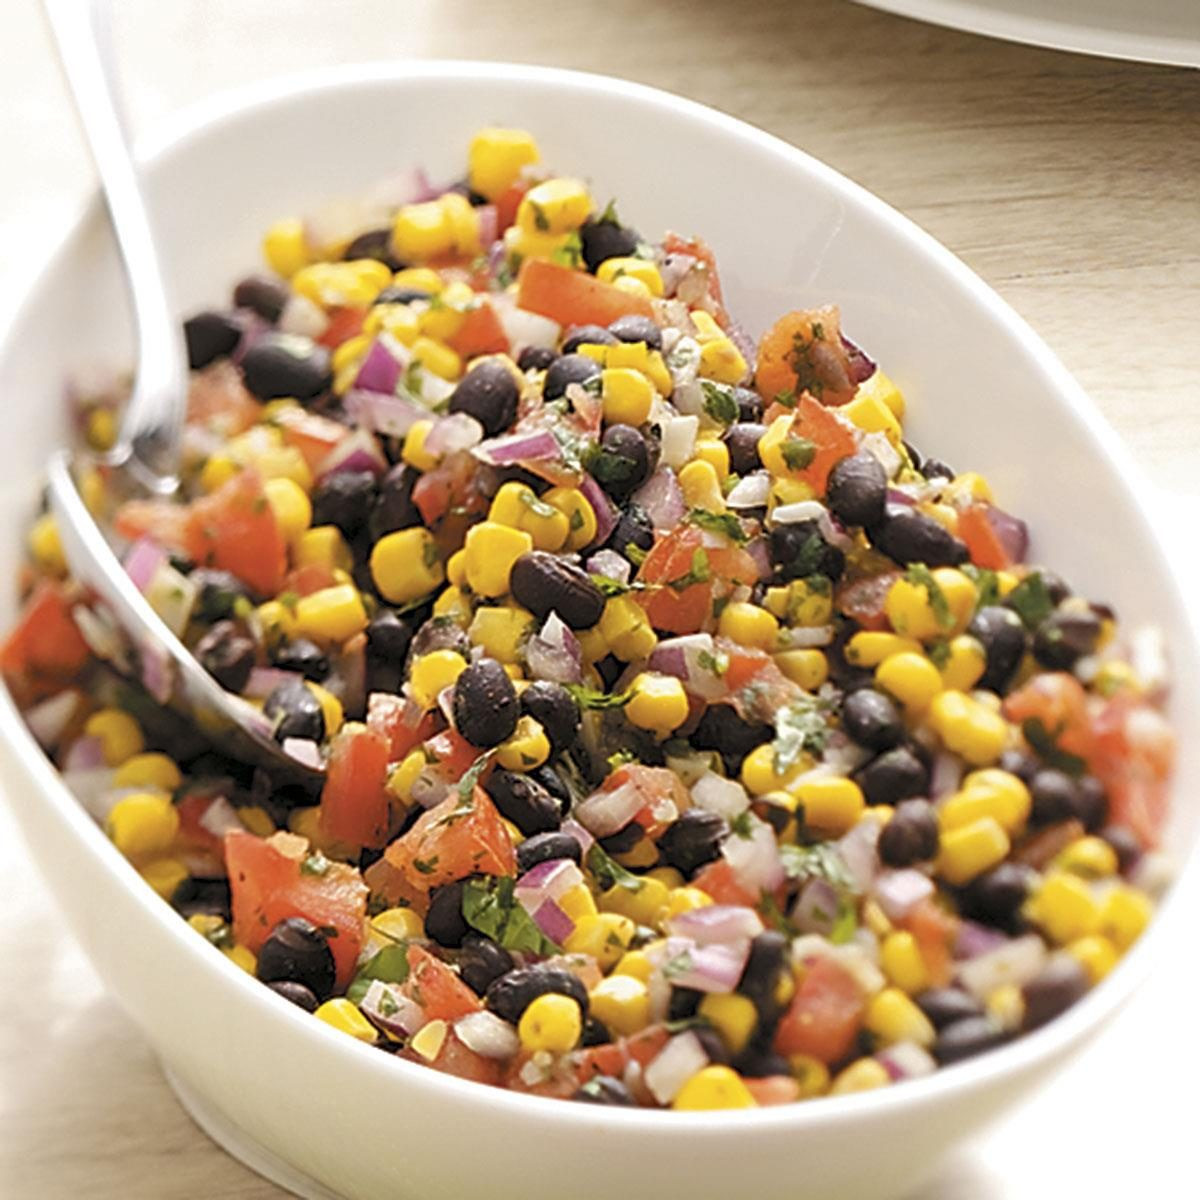 Don’t Miss Our 15 Most Shared Corn and Bean Salad